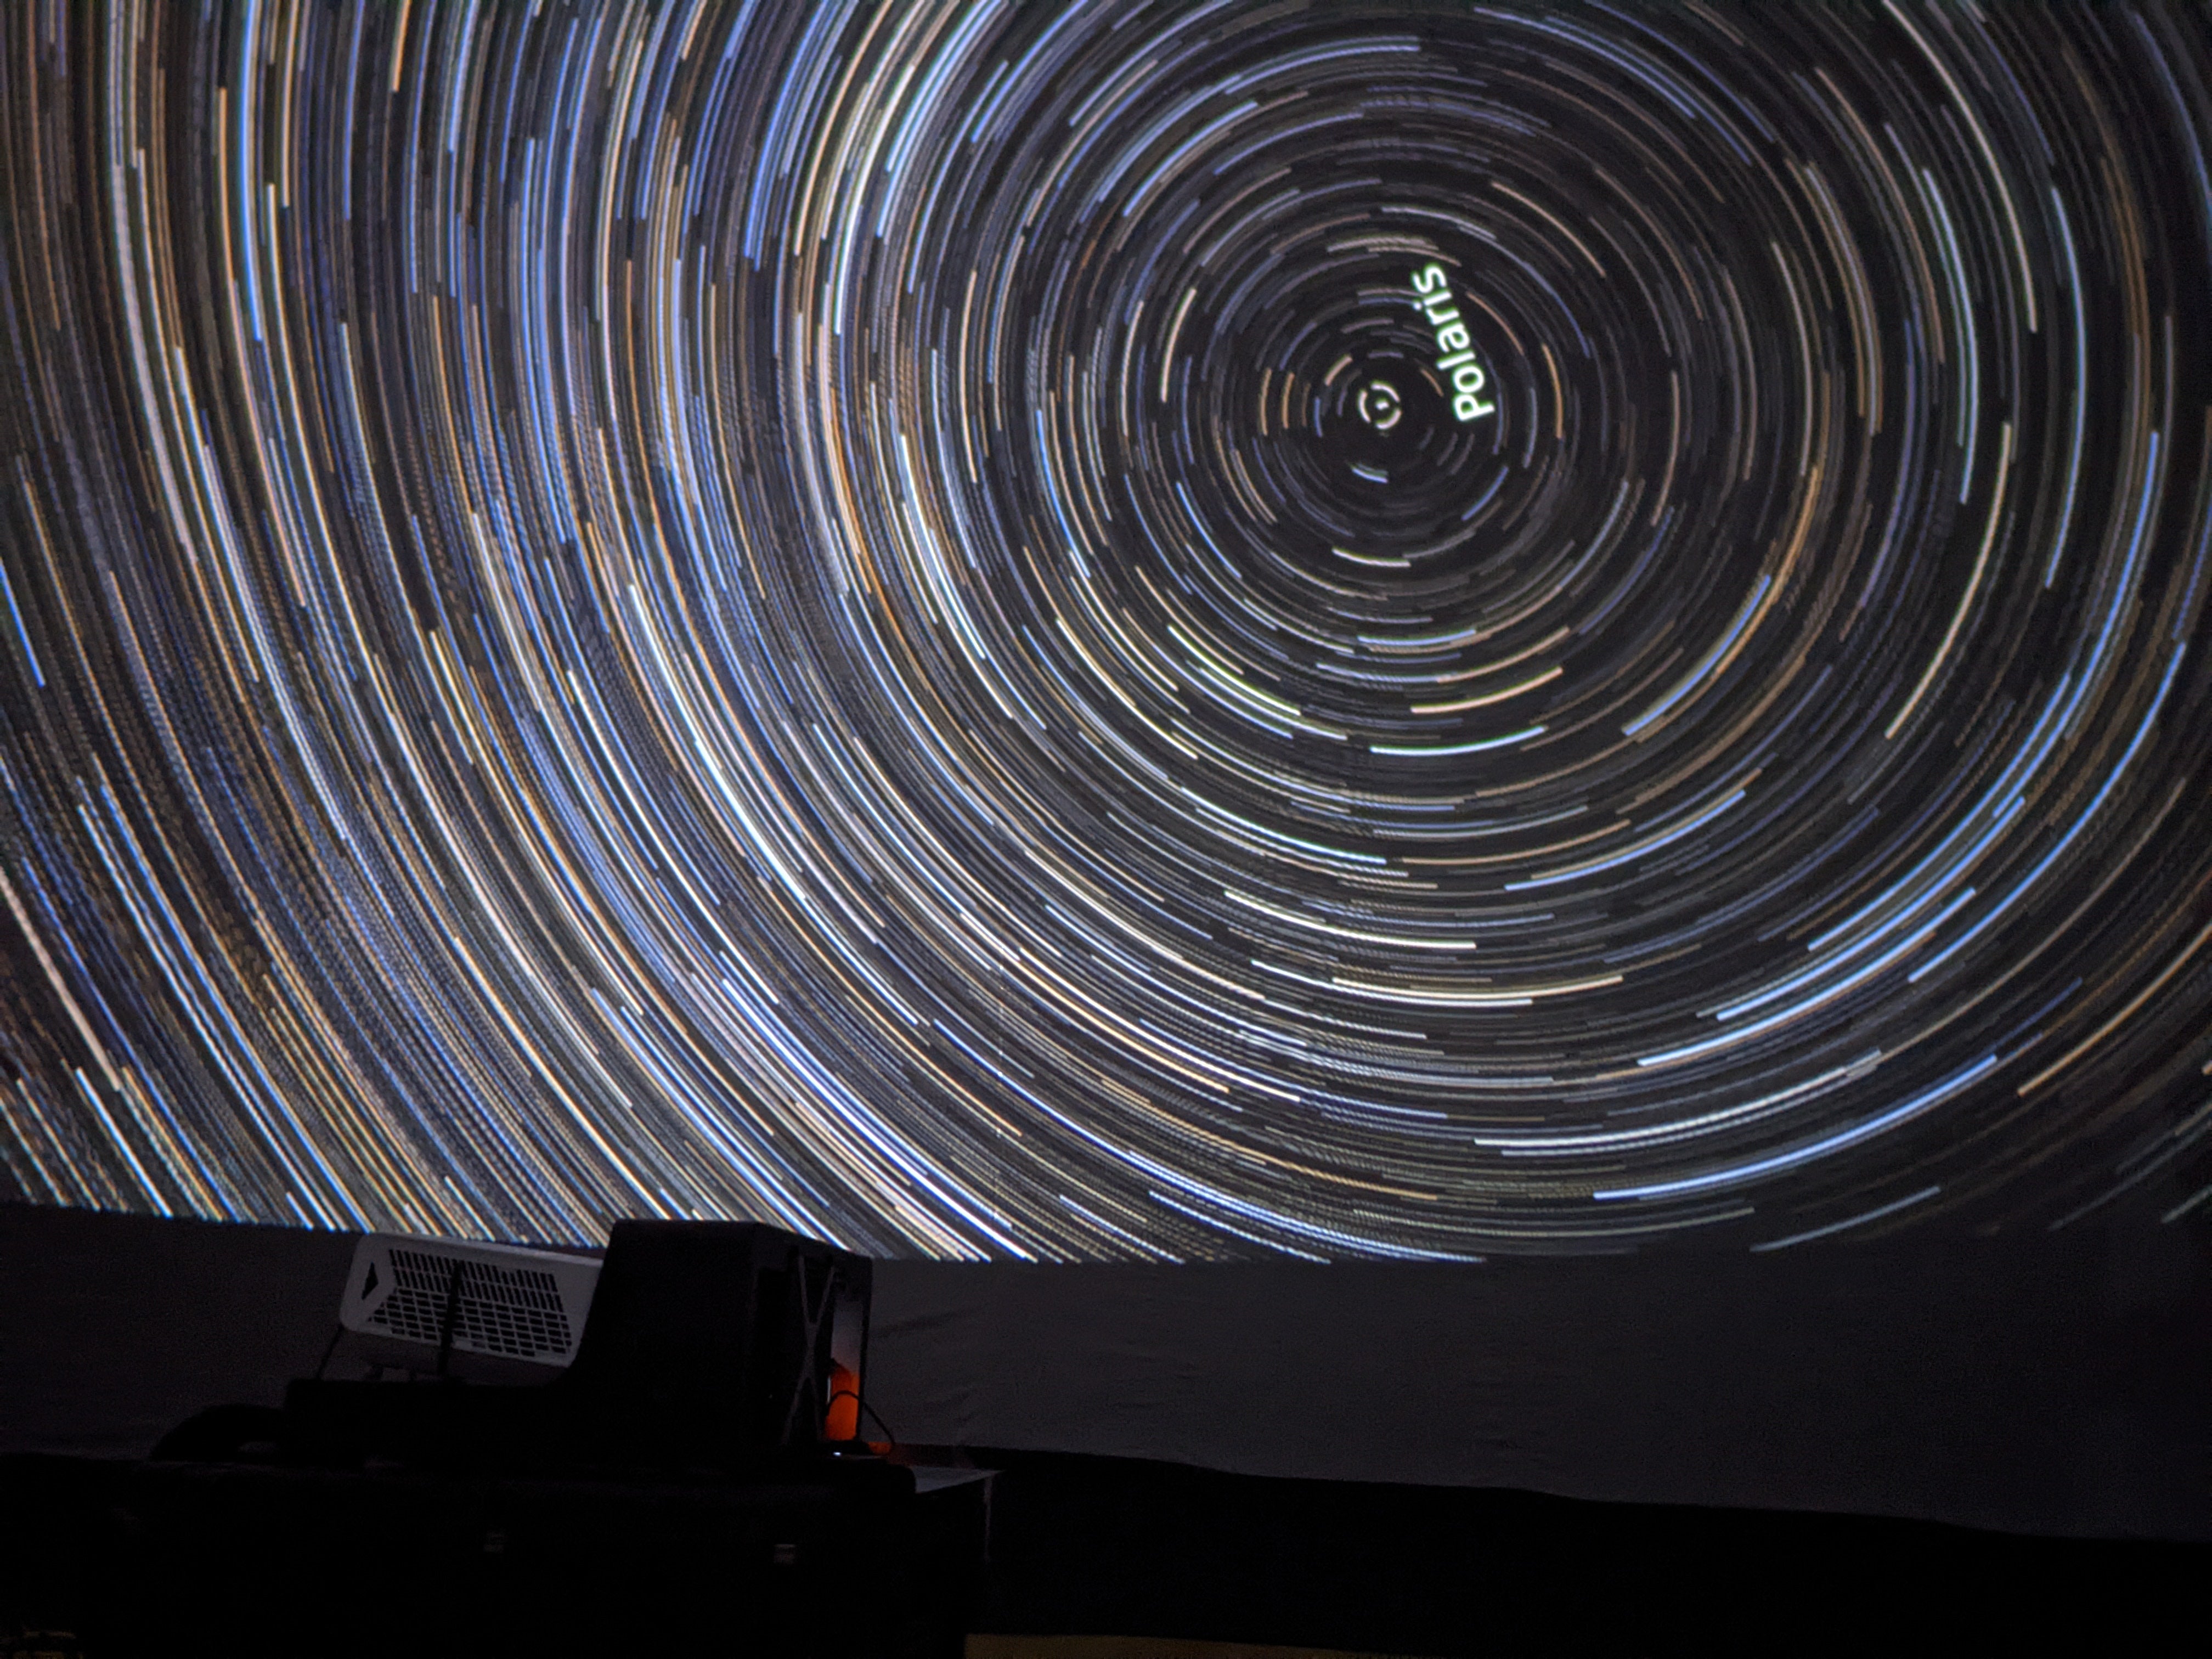 Photograph of the inside of the Astro-Bubble, showing movement of stars across the sky